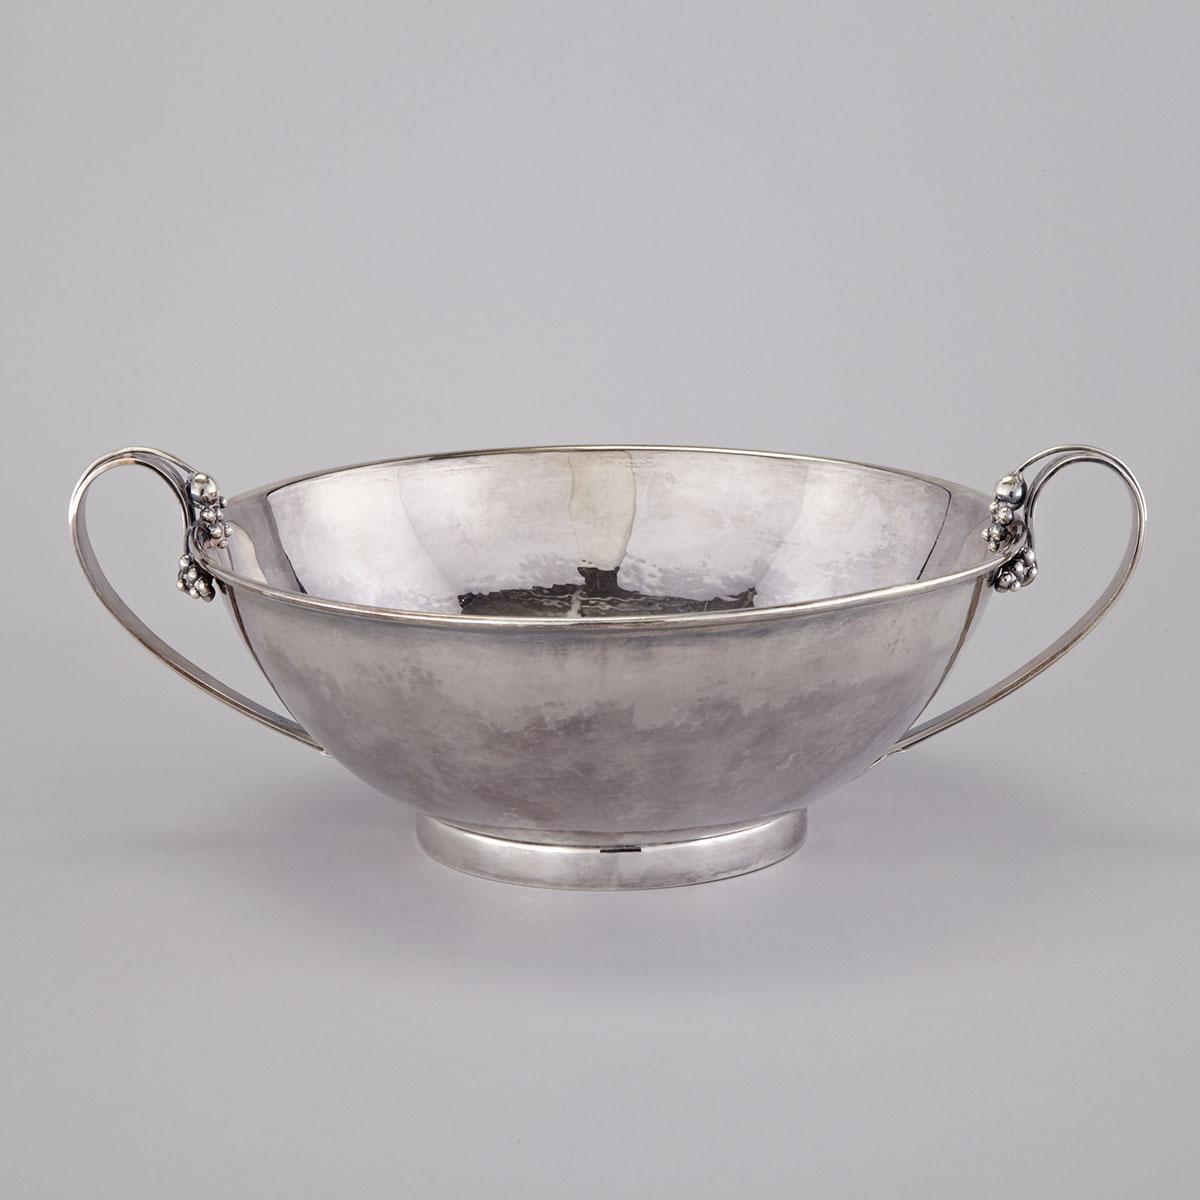 Canadian Silver Two-Handled Bowl, Carl Poul Petersen, Montreal, Que., mid-20th century